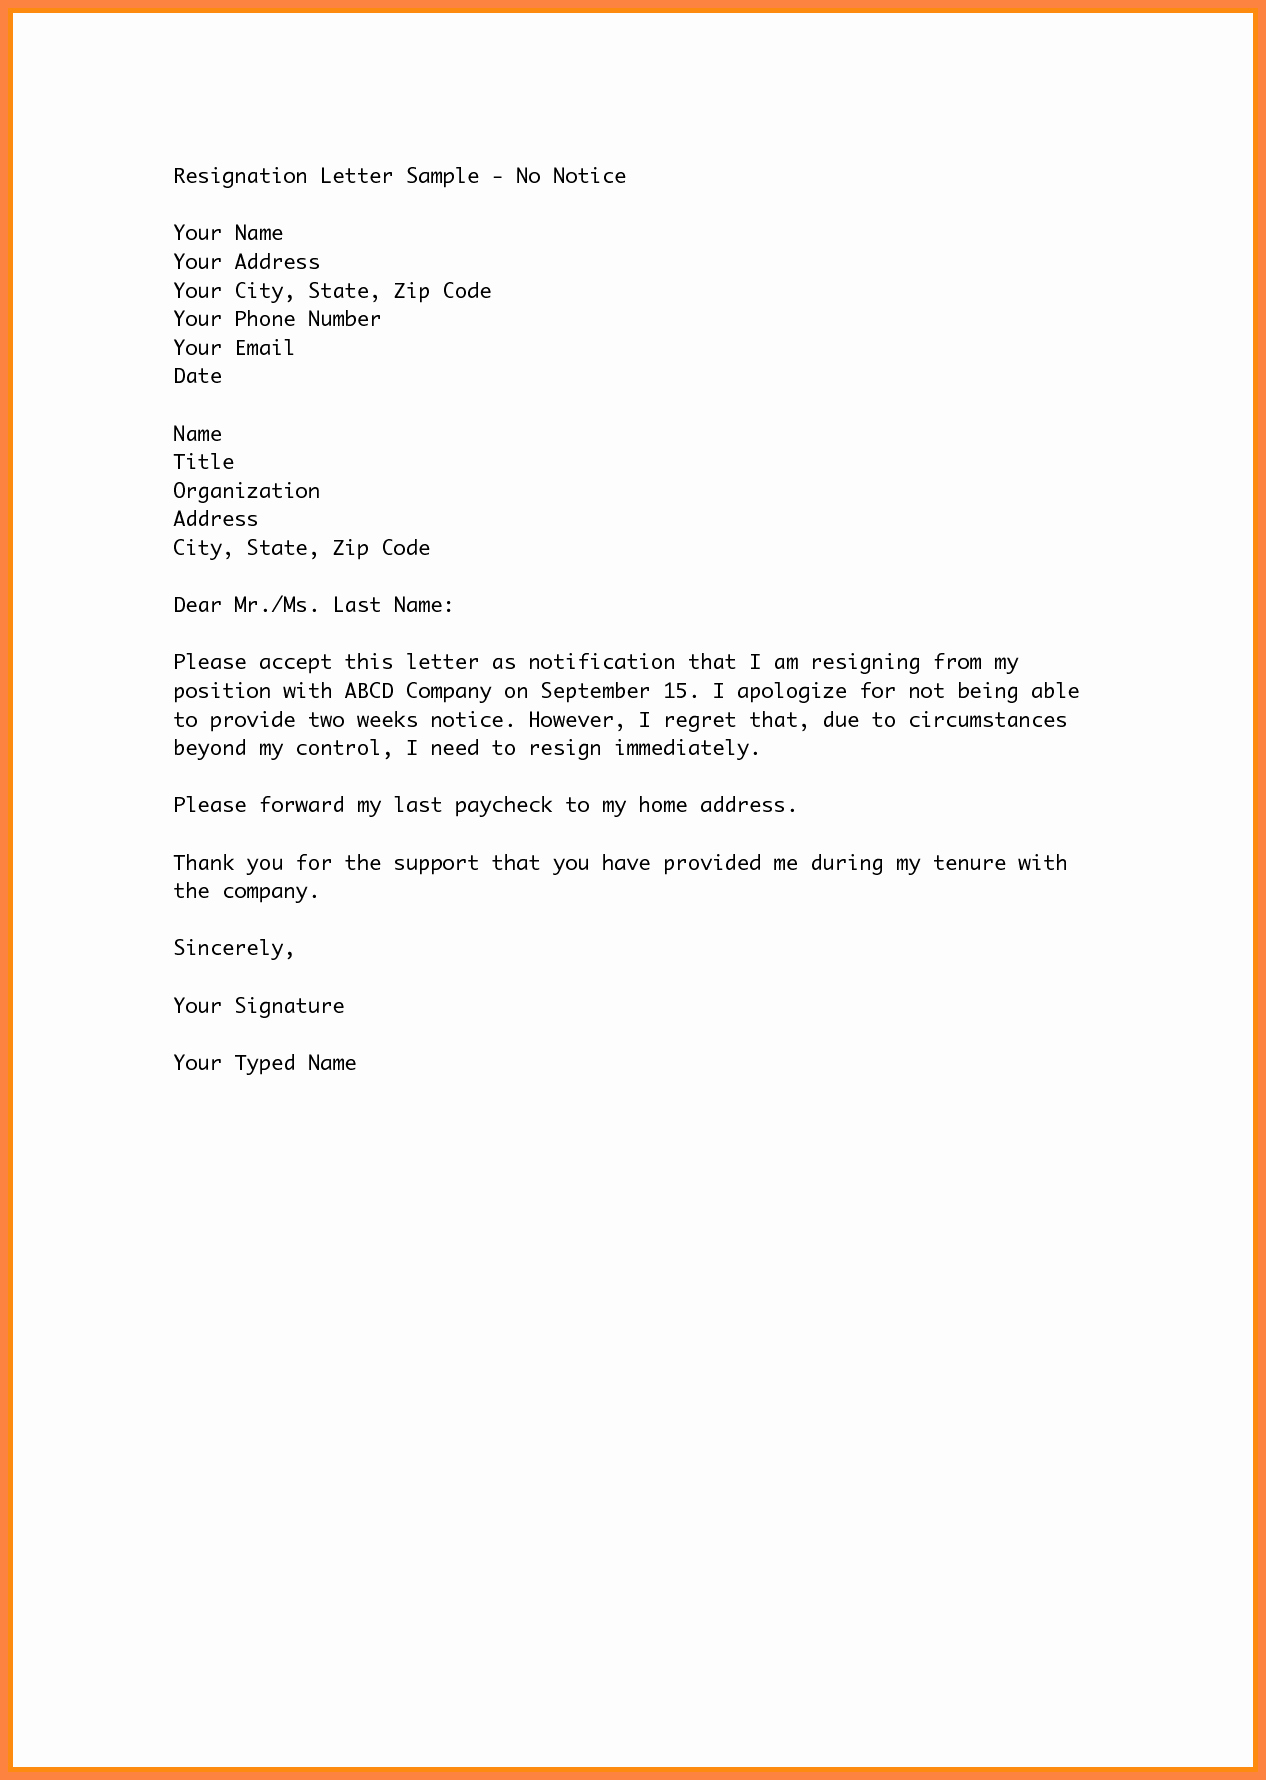 Resign Letter Short Notice Awesome 7 Sample Resignation Letter with Notice